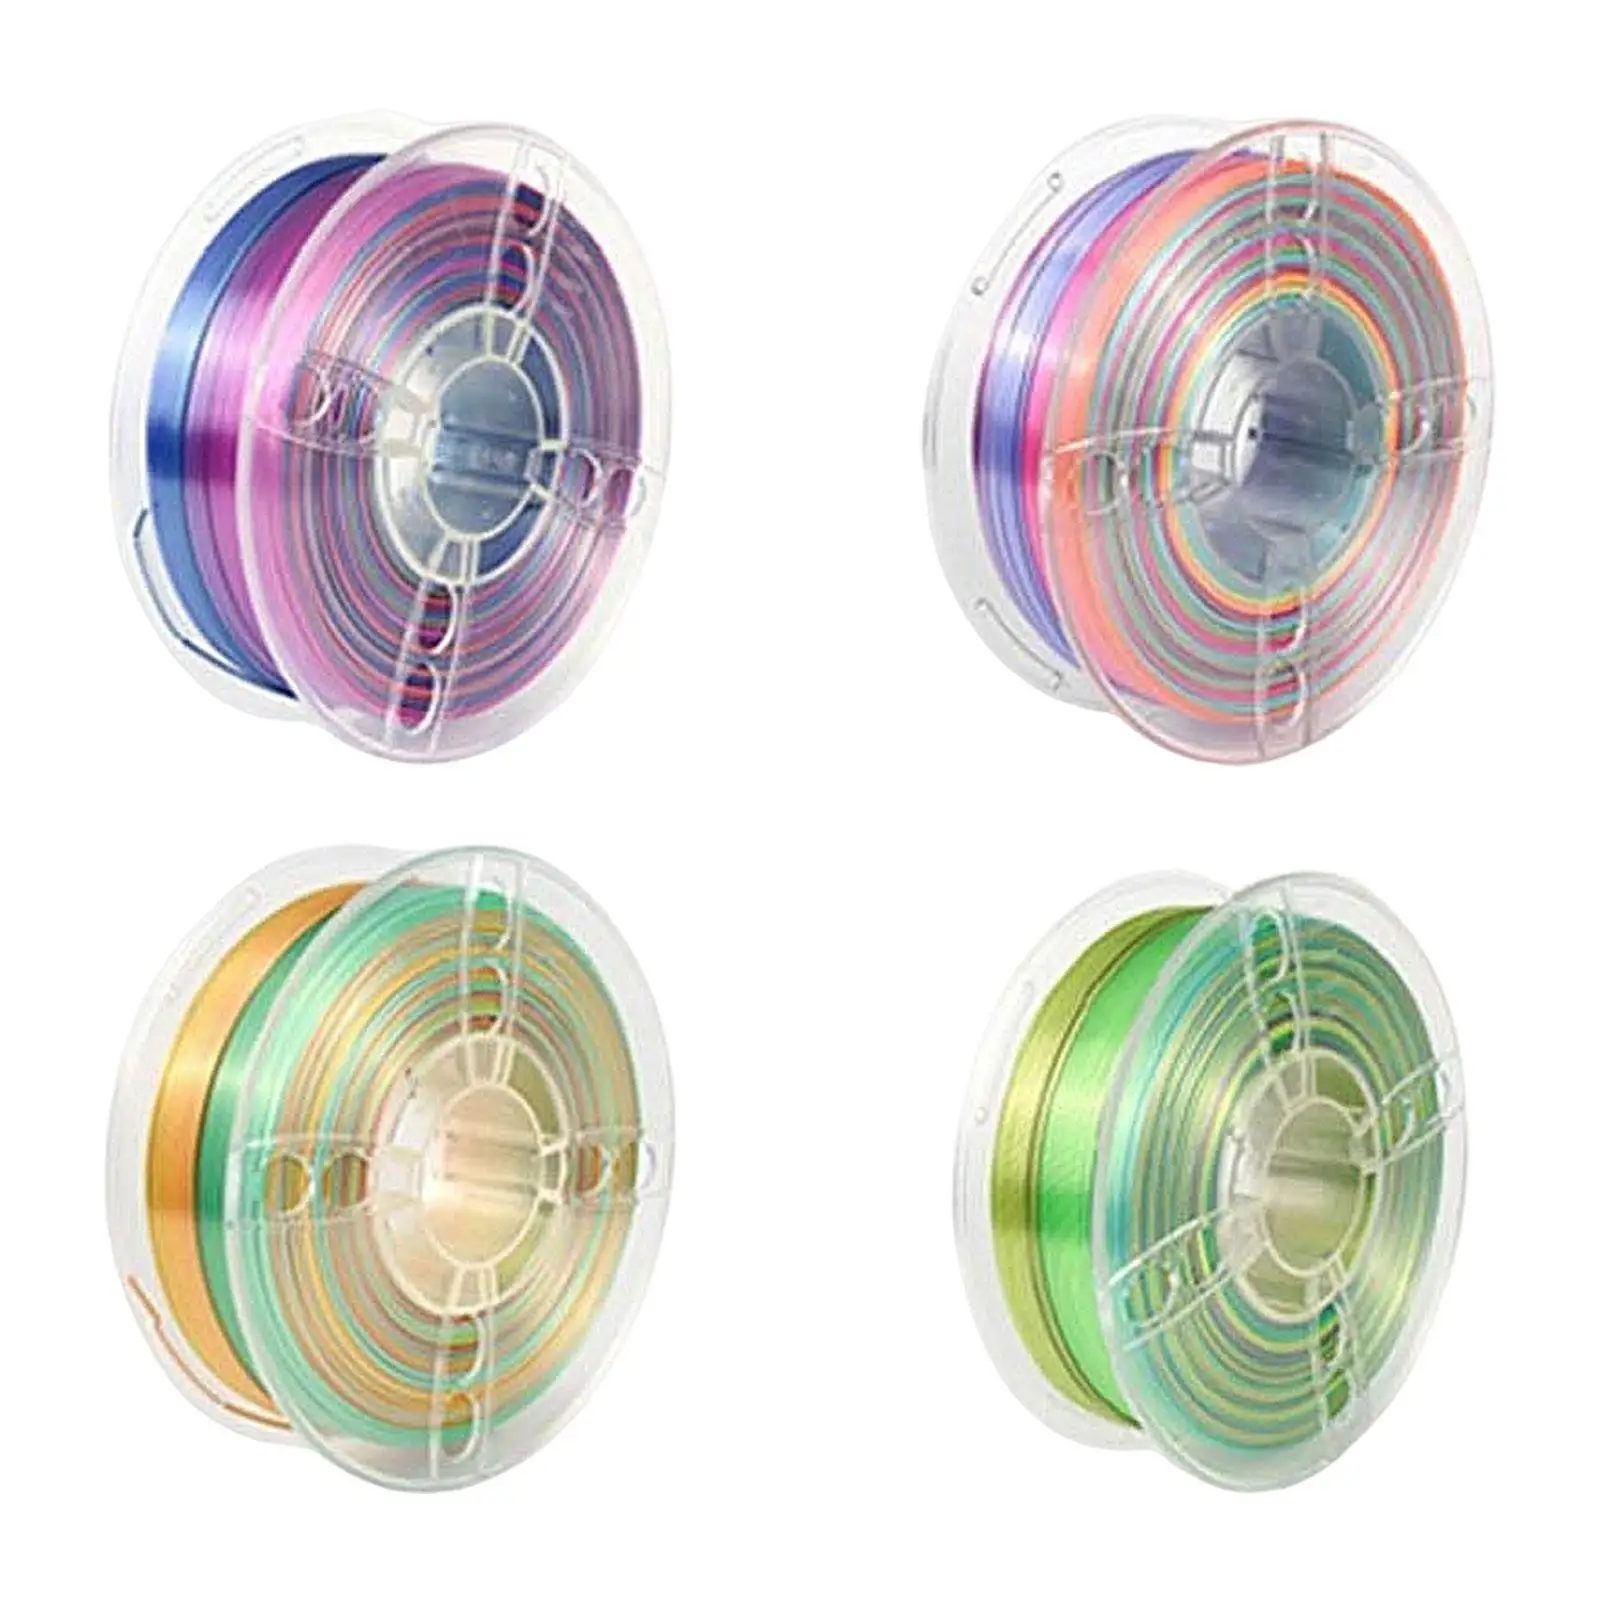 Pla 3D Printer Filament Bundle 1.75mm Good Shaping Accessories Multicolor Change Silky Shiny Neatly Wound 3D Printing Material